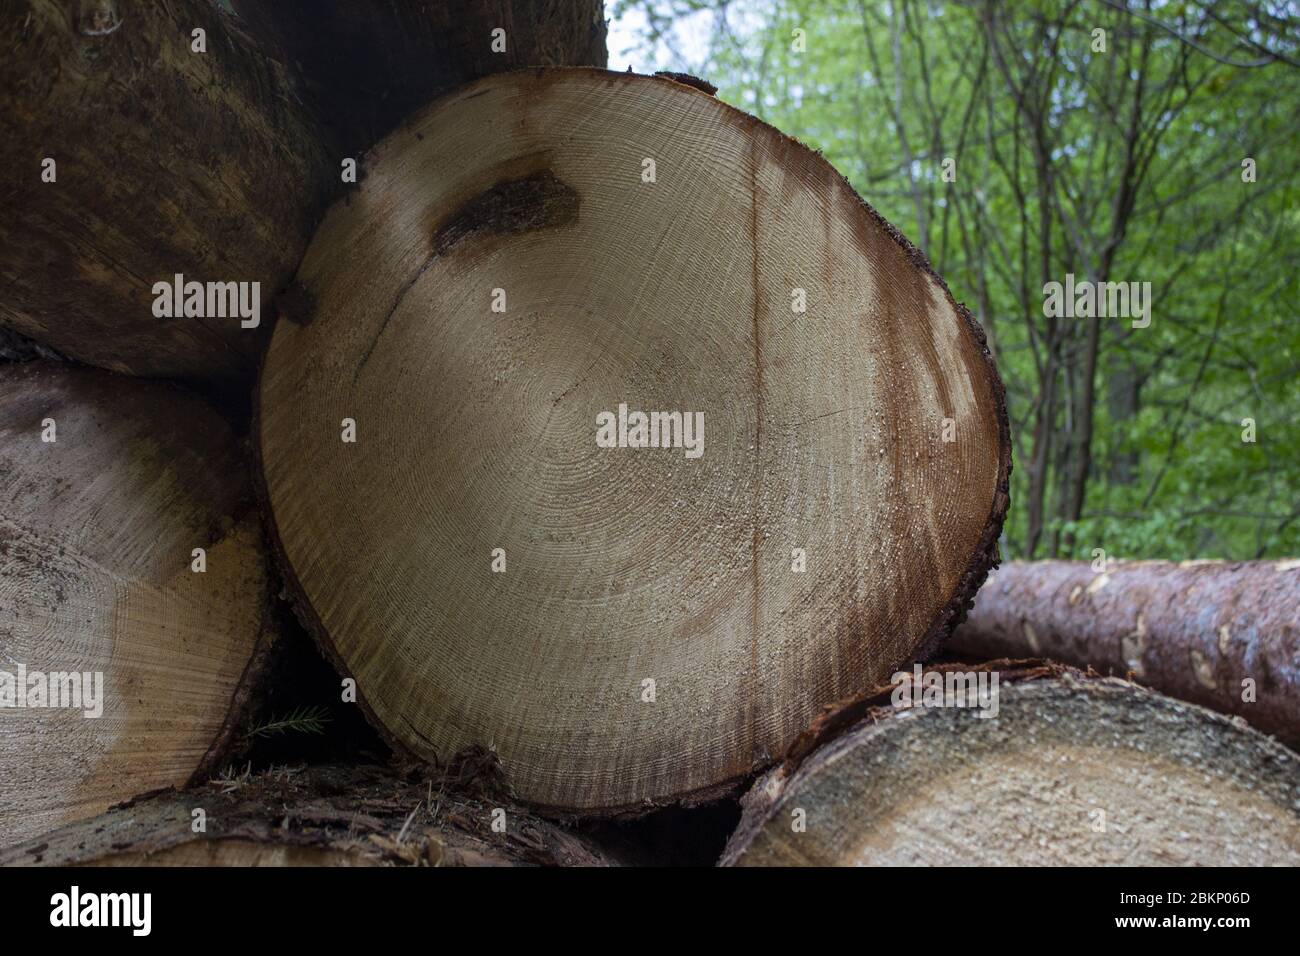 Detail of the annual rings of a cut tree. Tree logs stacked on top of each other in the forest. Stock Photo